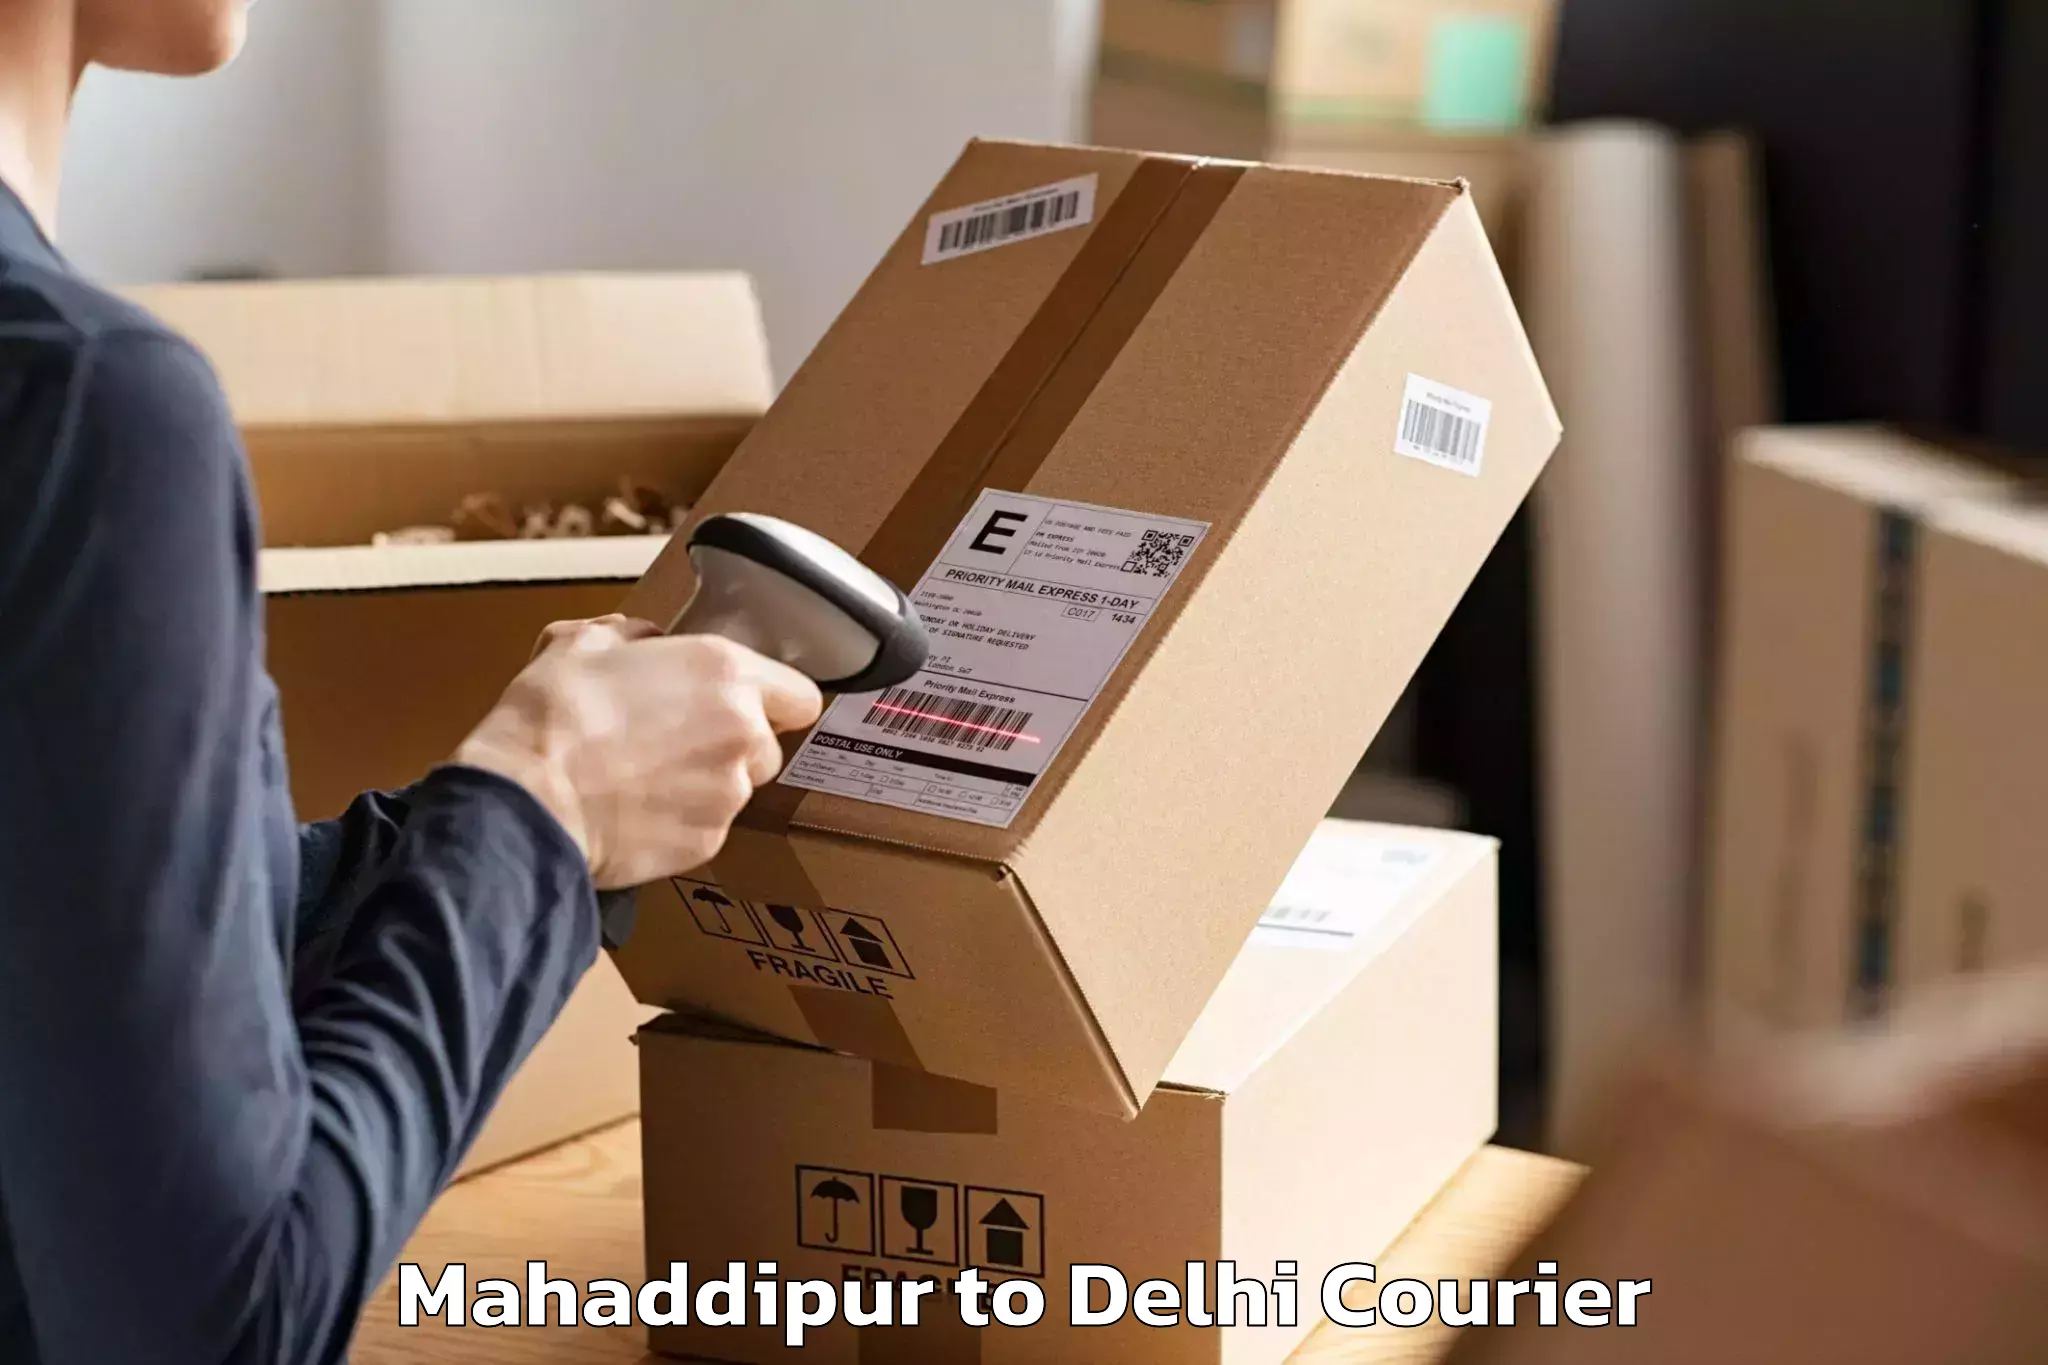 Full-service movers Mahaddipur to NCR